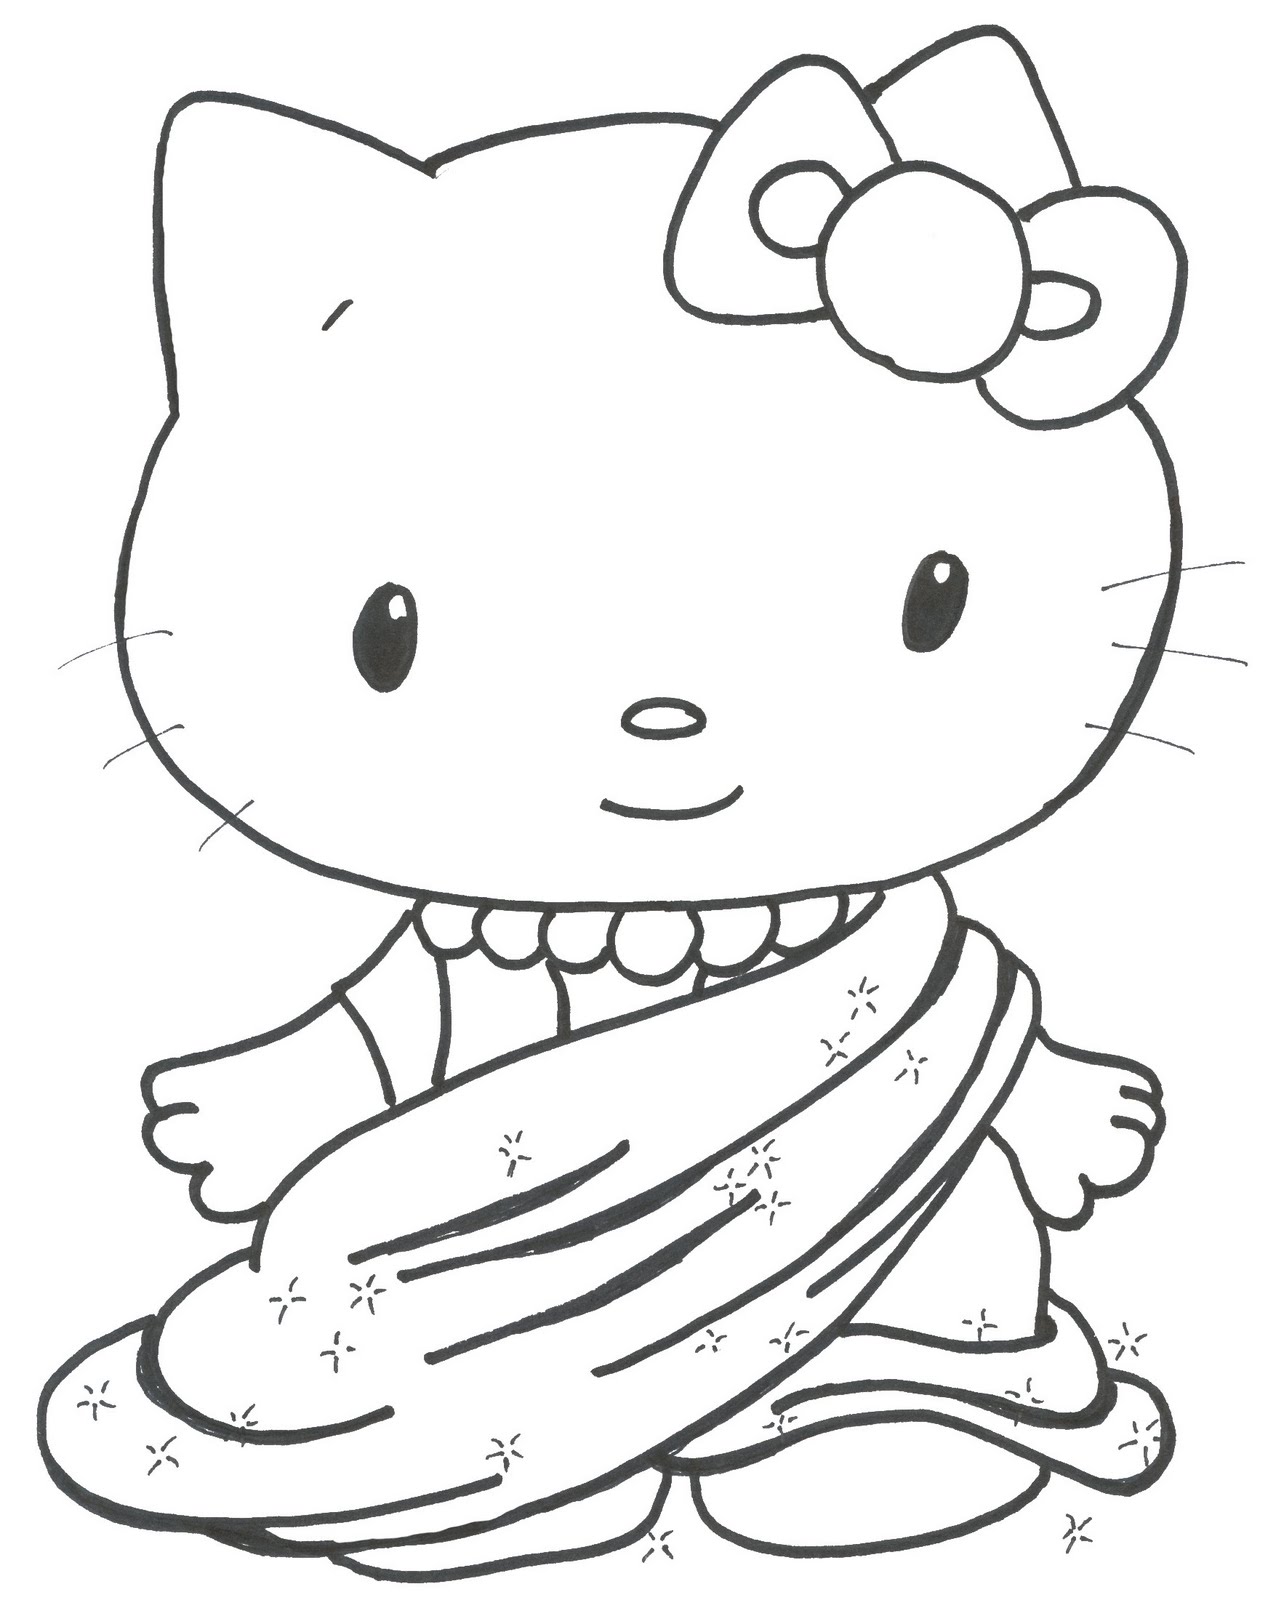 Download Wedding World: Cute Kitten Coloring Pages